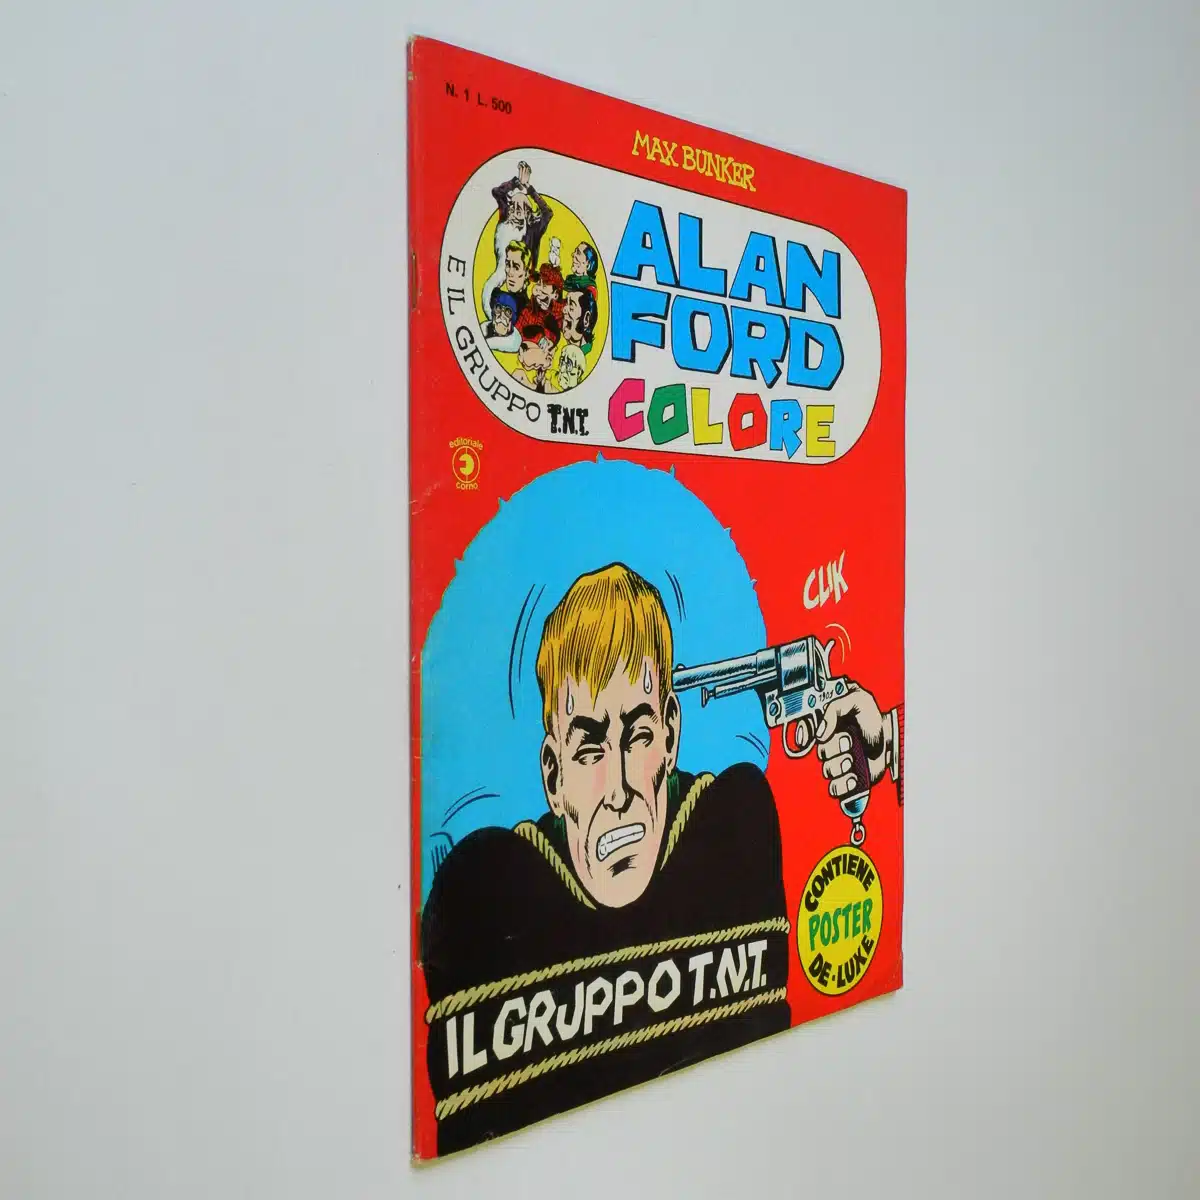 Alan Ford Colore n. 1 con Poster Il Gruppo T.N.T.